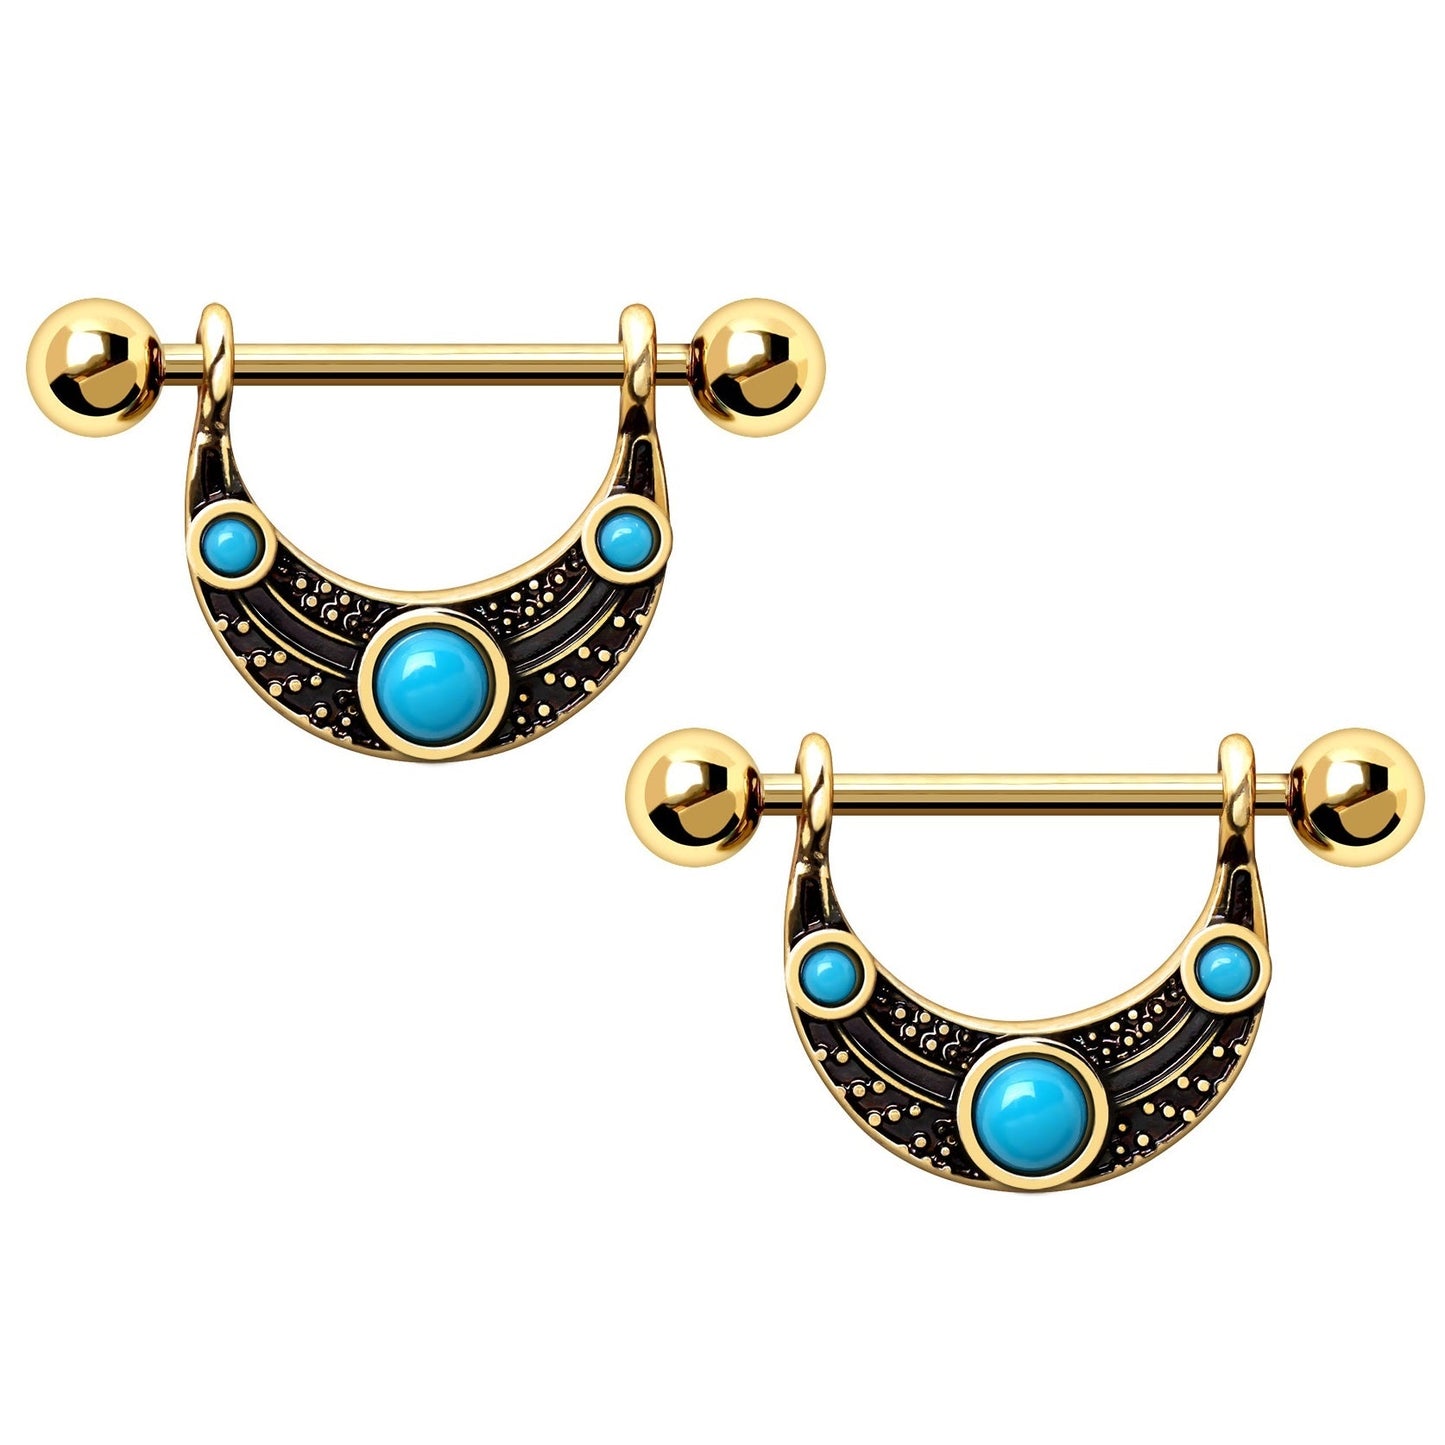 Gold Plated Turquoise Beaded Tribal Nipple Barbells - Stainless Steel - Pair